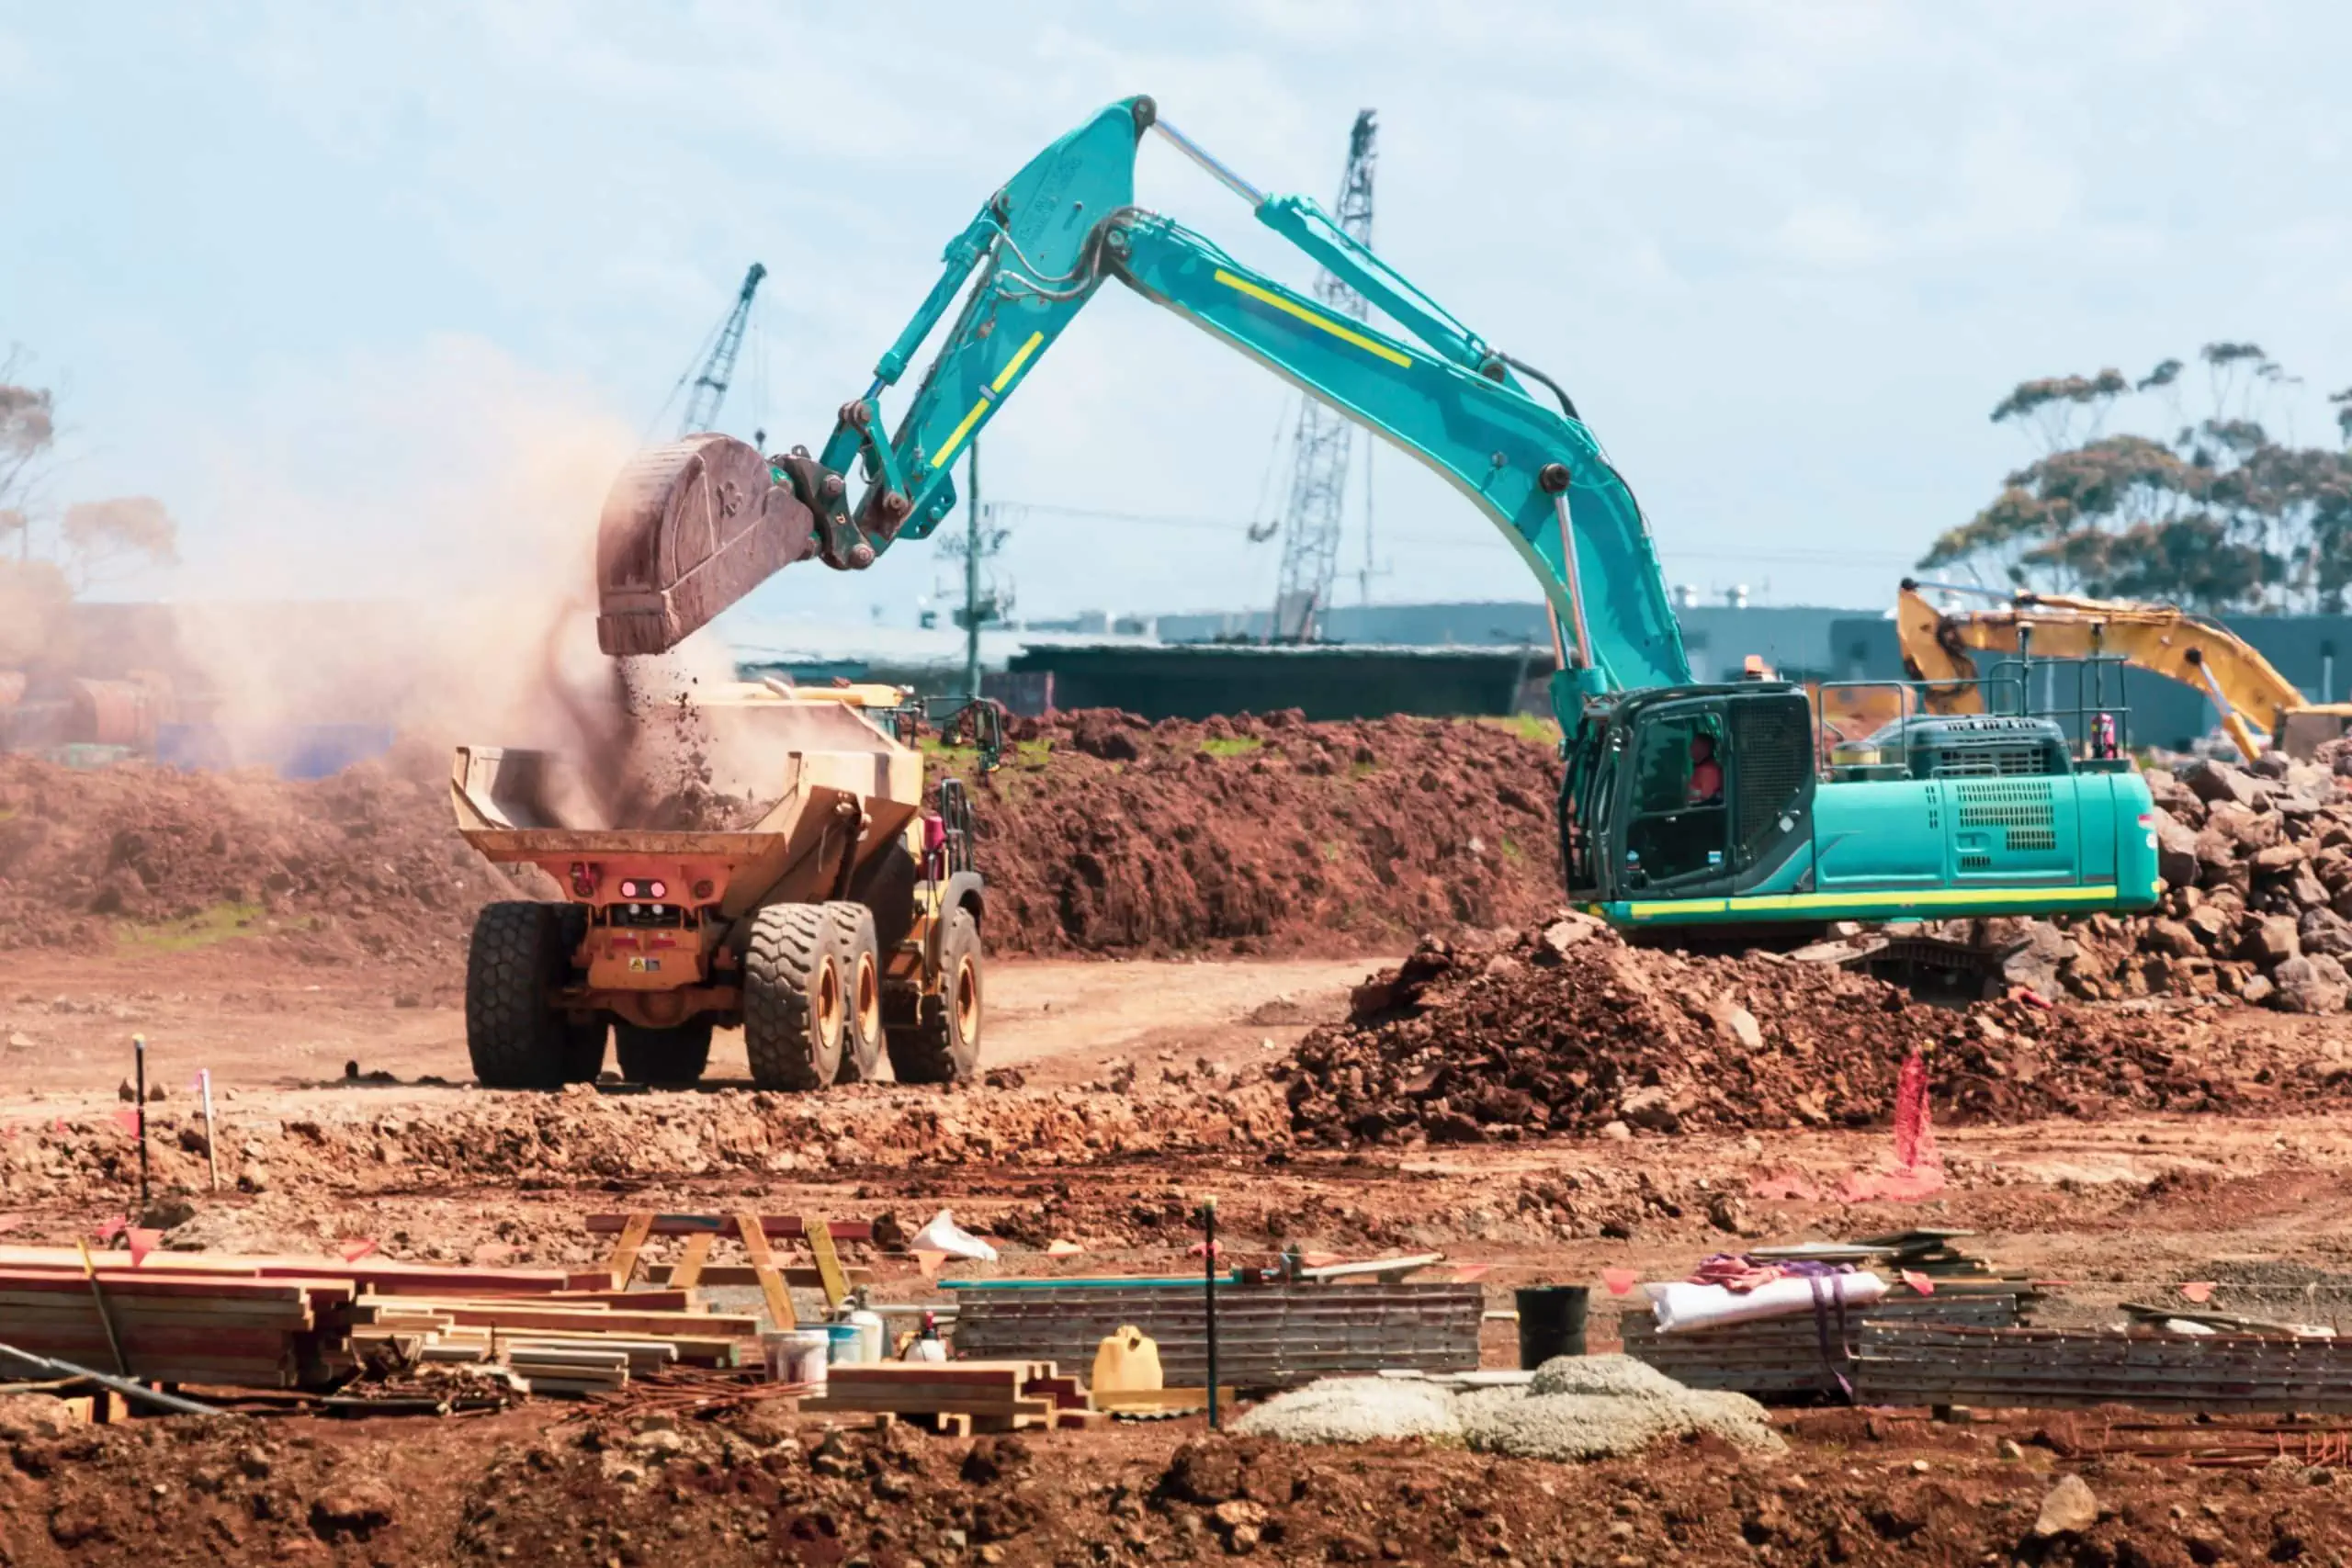 Construction equipment on worksite that is monitored by construction security camera